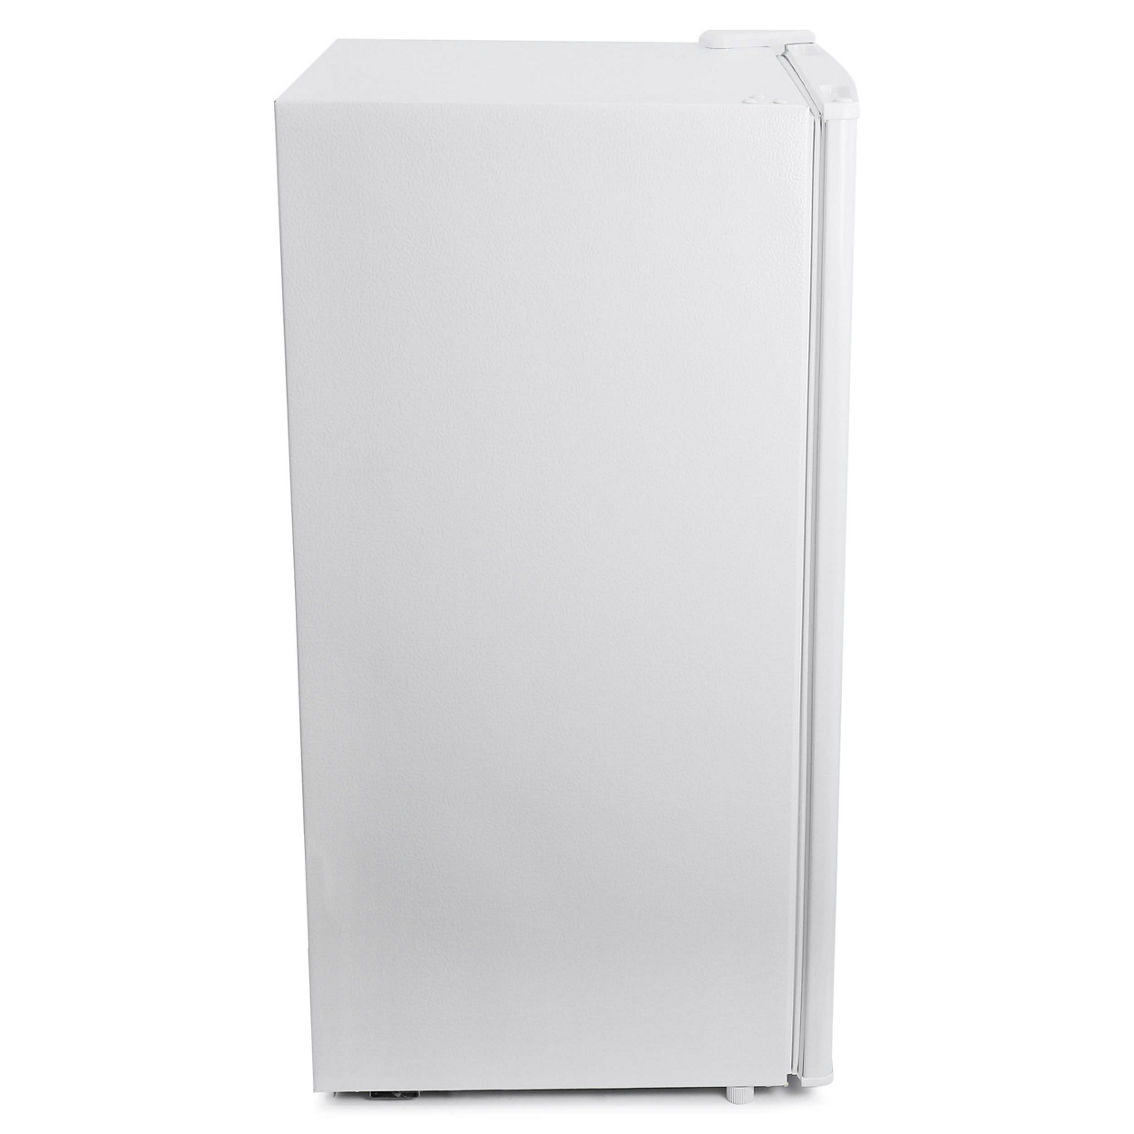 MegaChef 3.2 Cubic Feet Refrigerator in White - Image 4 of 5